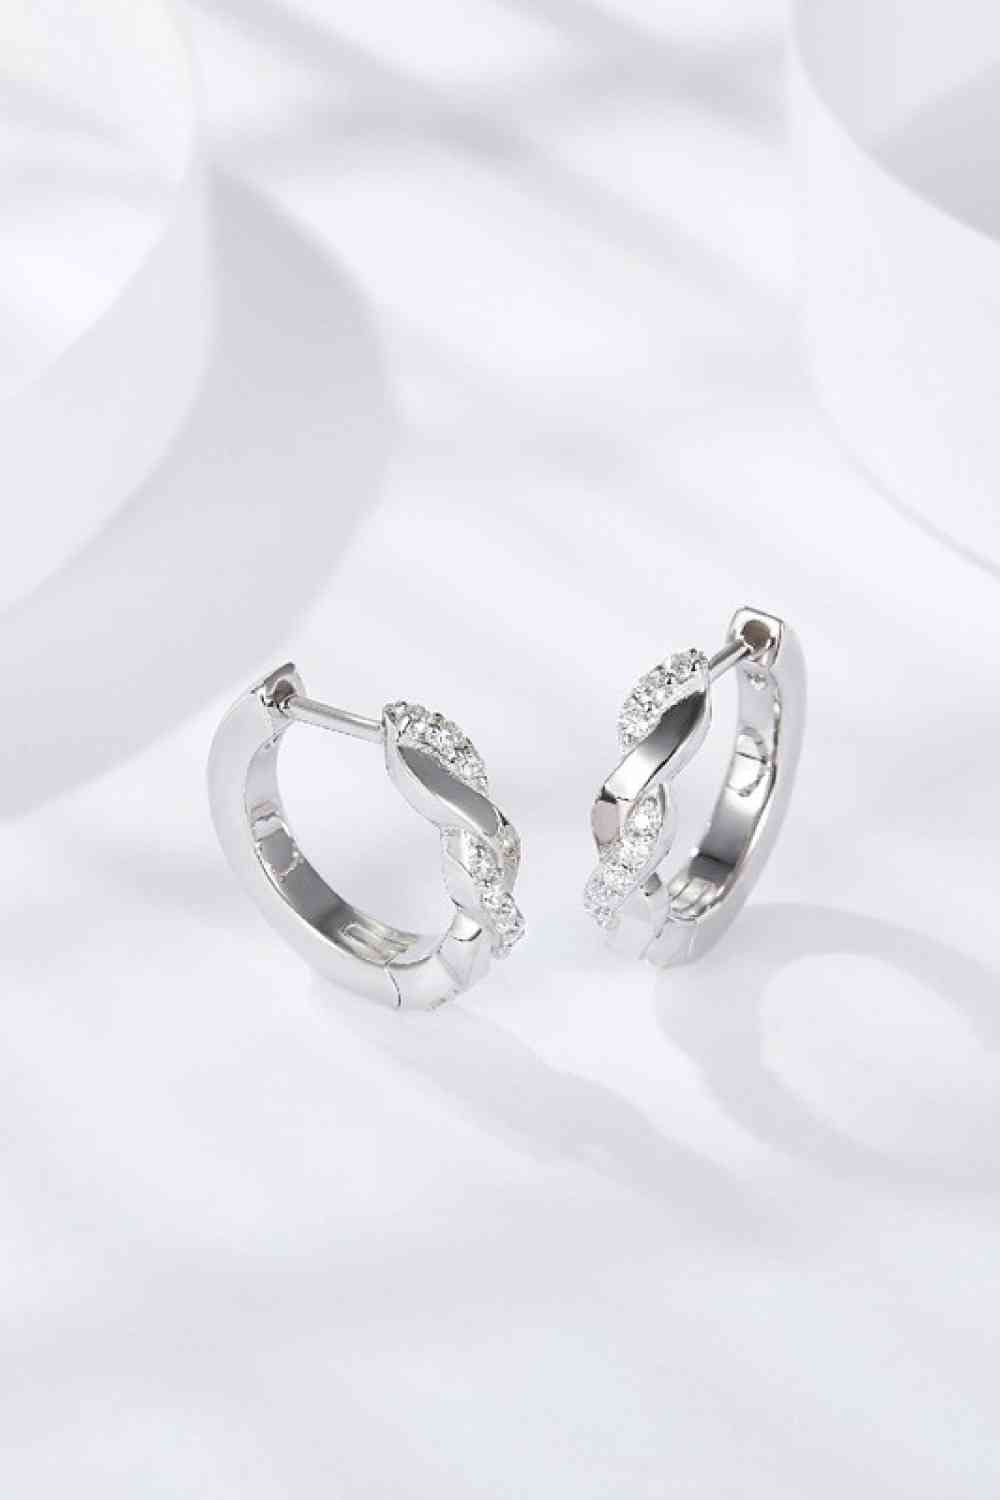 Moissanite Twisted Platinum-Plated Earrings - Tophatter Deals